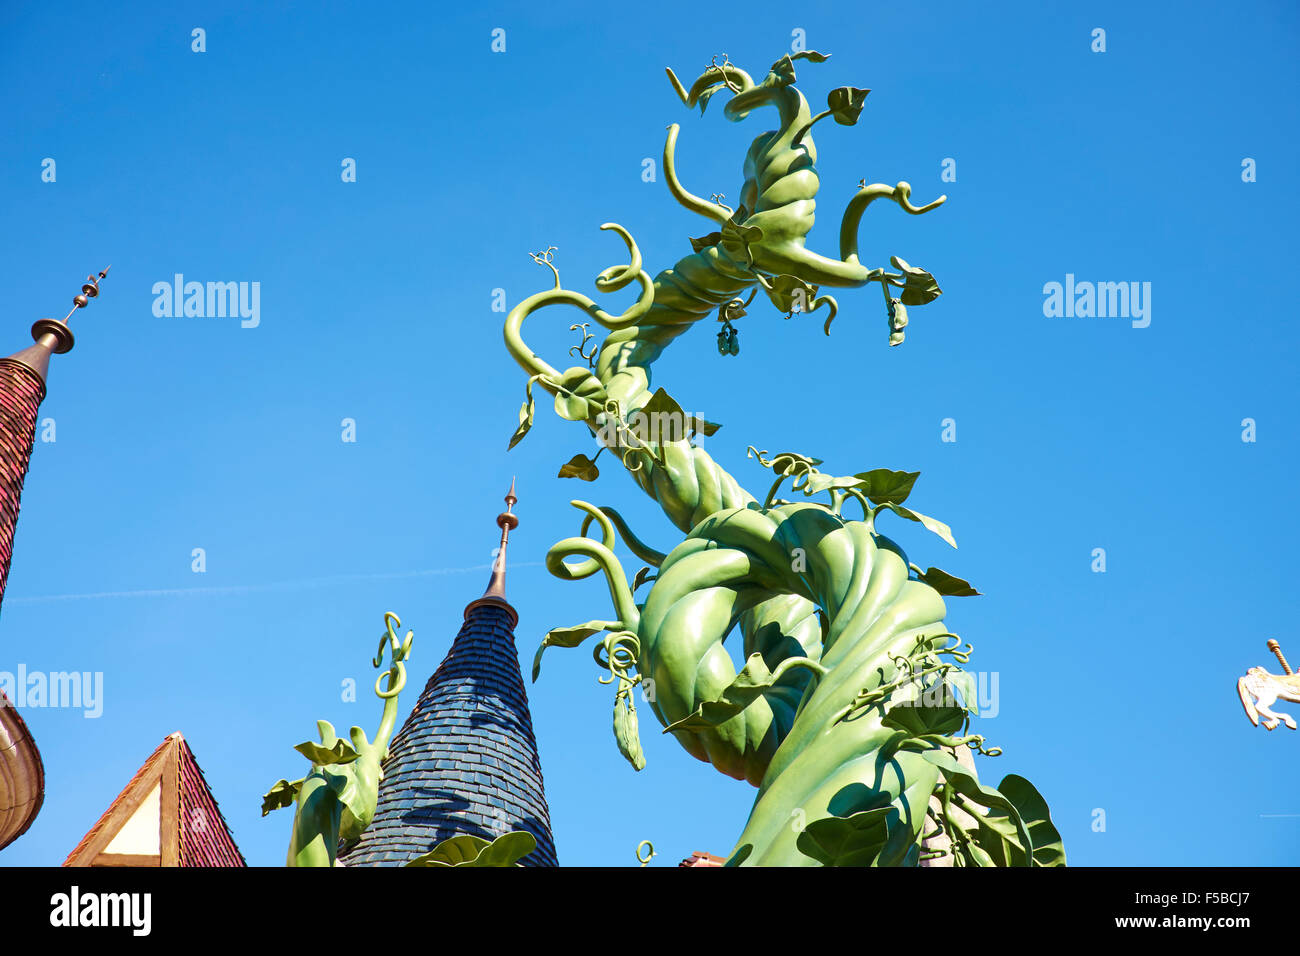 The Beanstalk From The Story Jack And The Beanstalk Disneyland Paris Marne-la-Vallee Chessy France Stock Photo